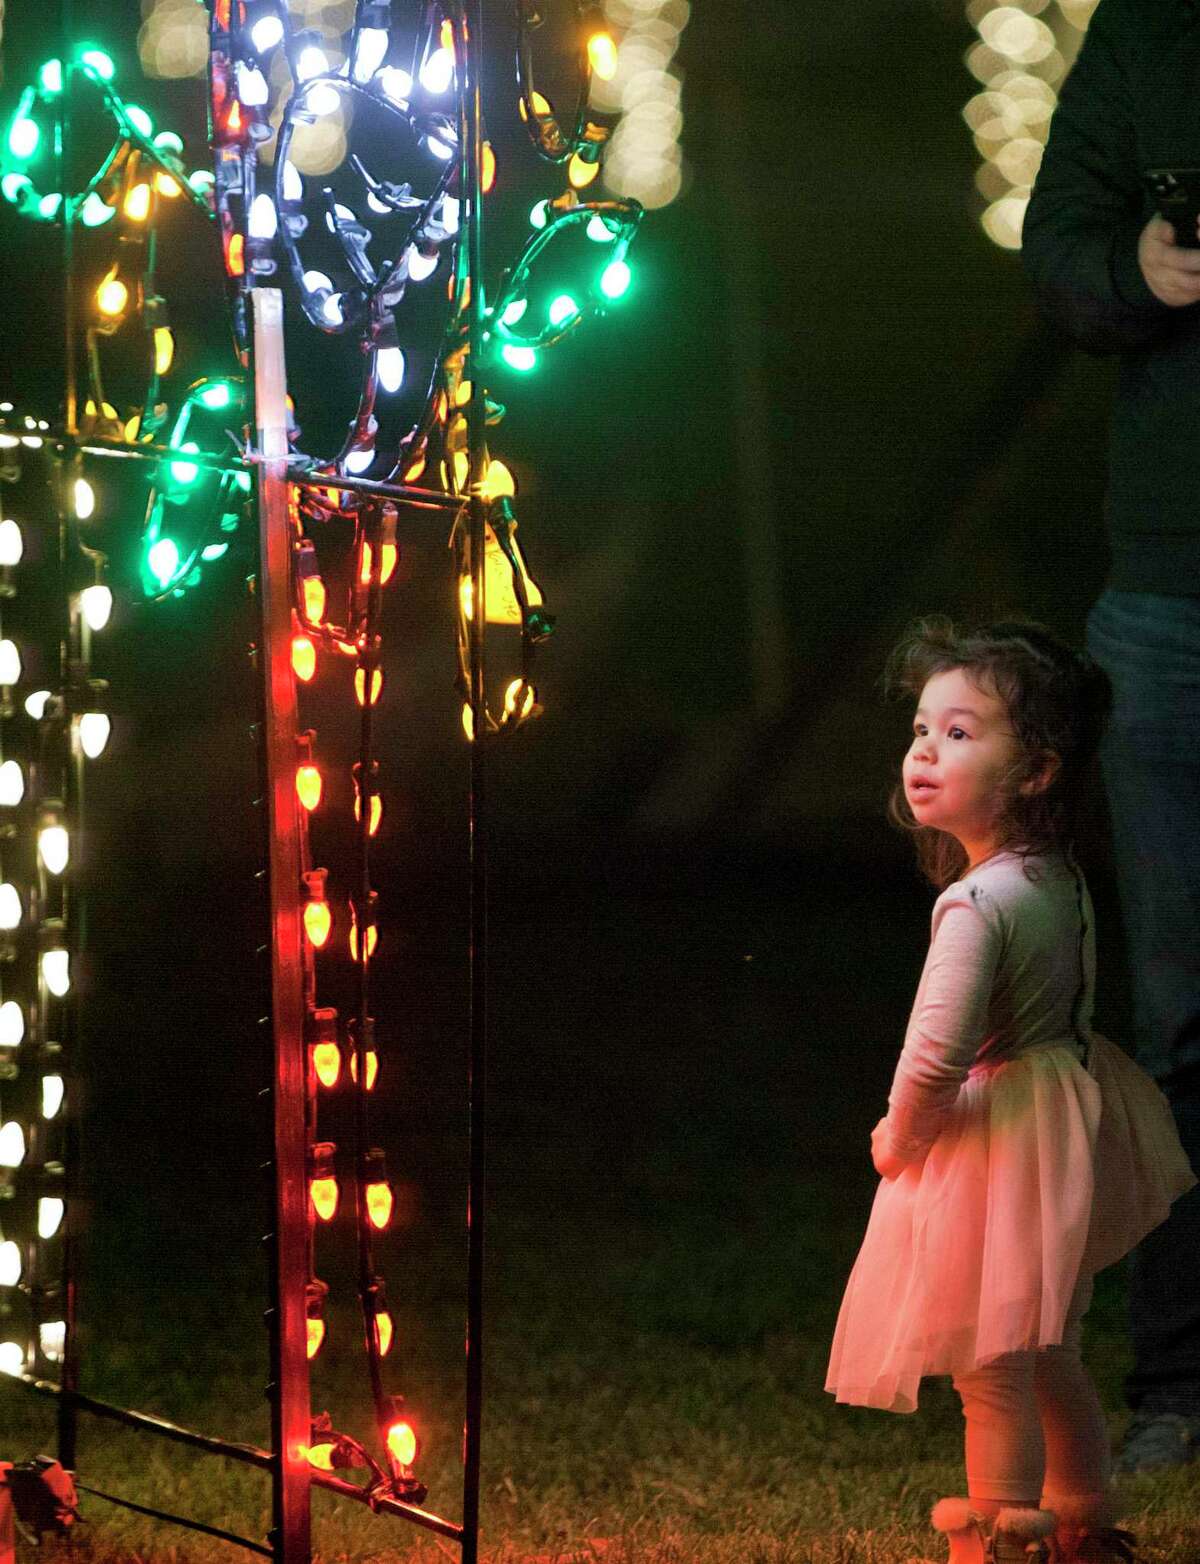 Maisie Kim, 2, of Stamford, gazes at one of the many holiday displays at Stamford's Holiday Stroll at Mill River Park in Stamford, Conn., on Thursday November 2, 2021. Along with the stroll past many holiday lights, there were visits with Santa Claus, live music, carolers, a winter beer garden and food vendors.